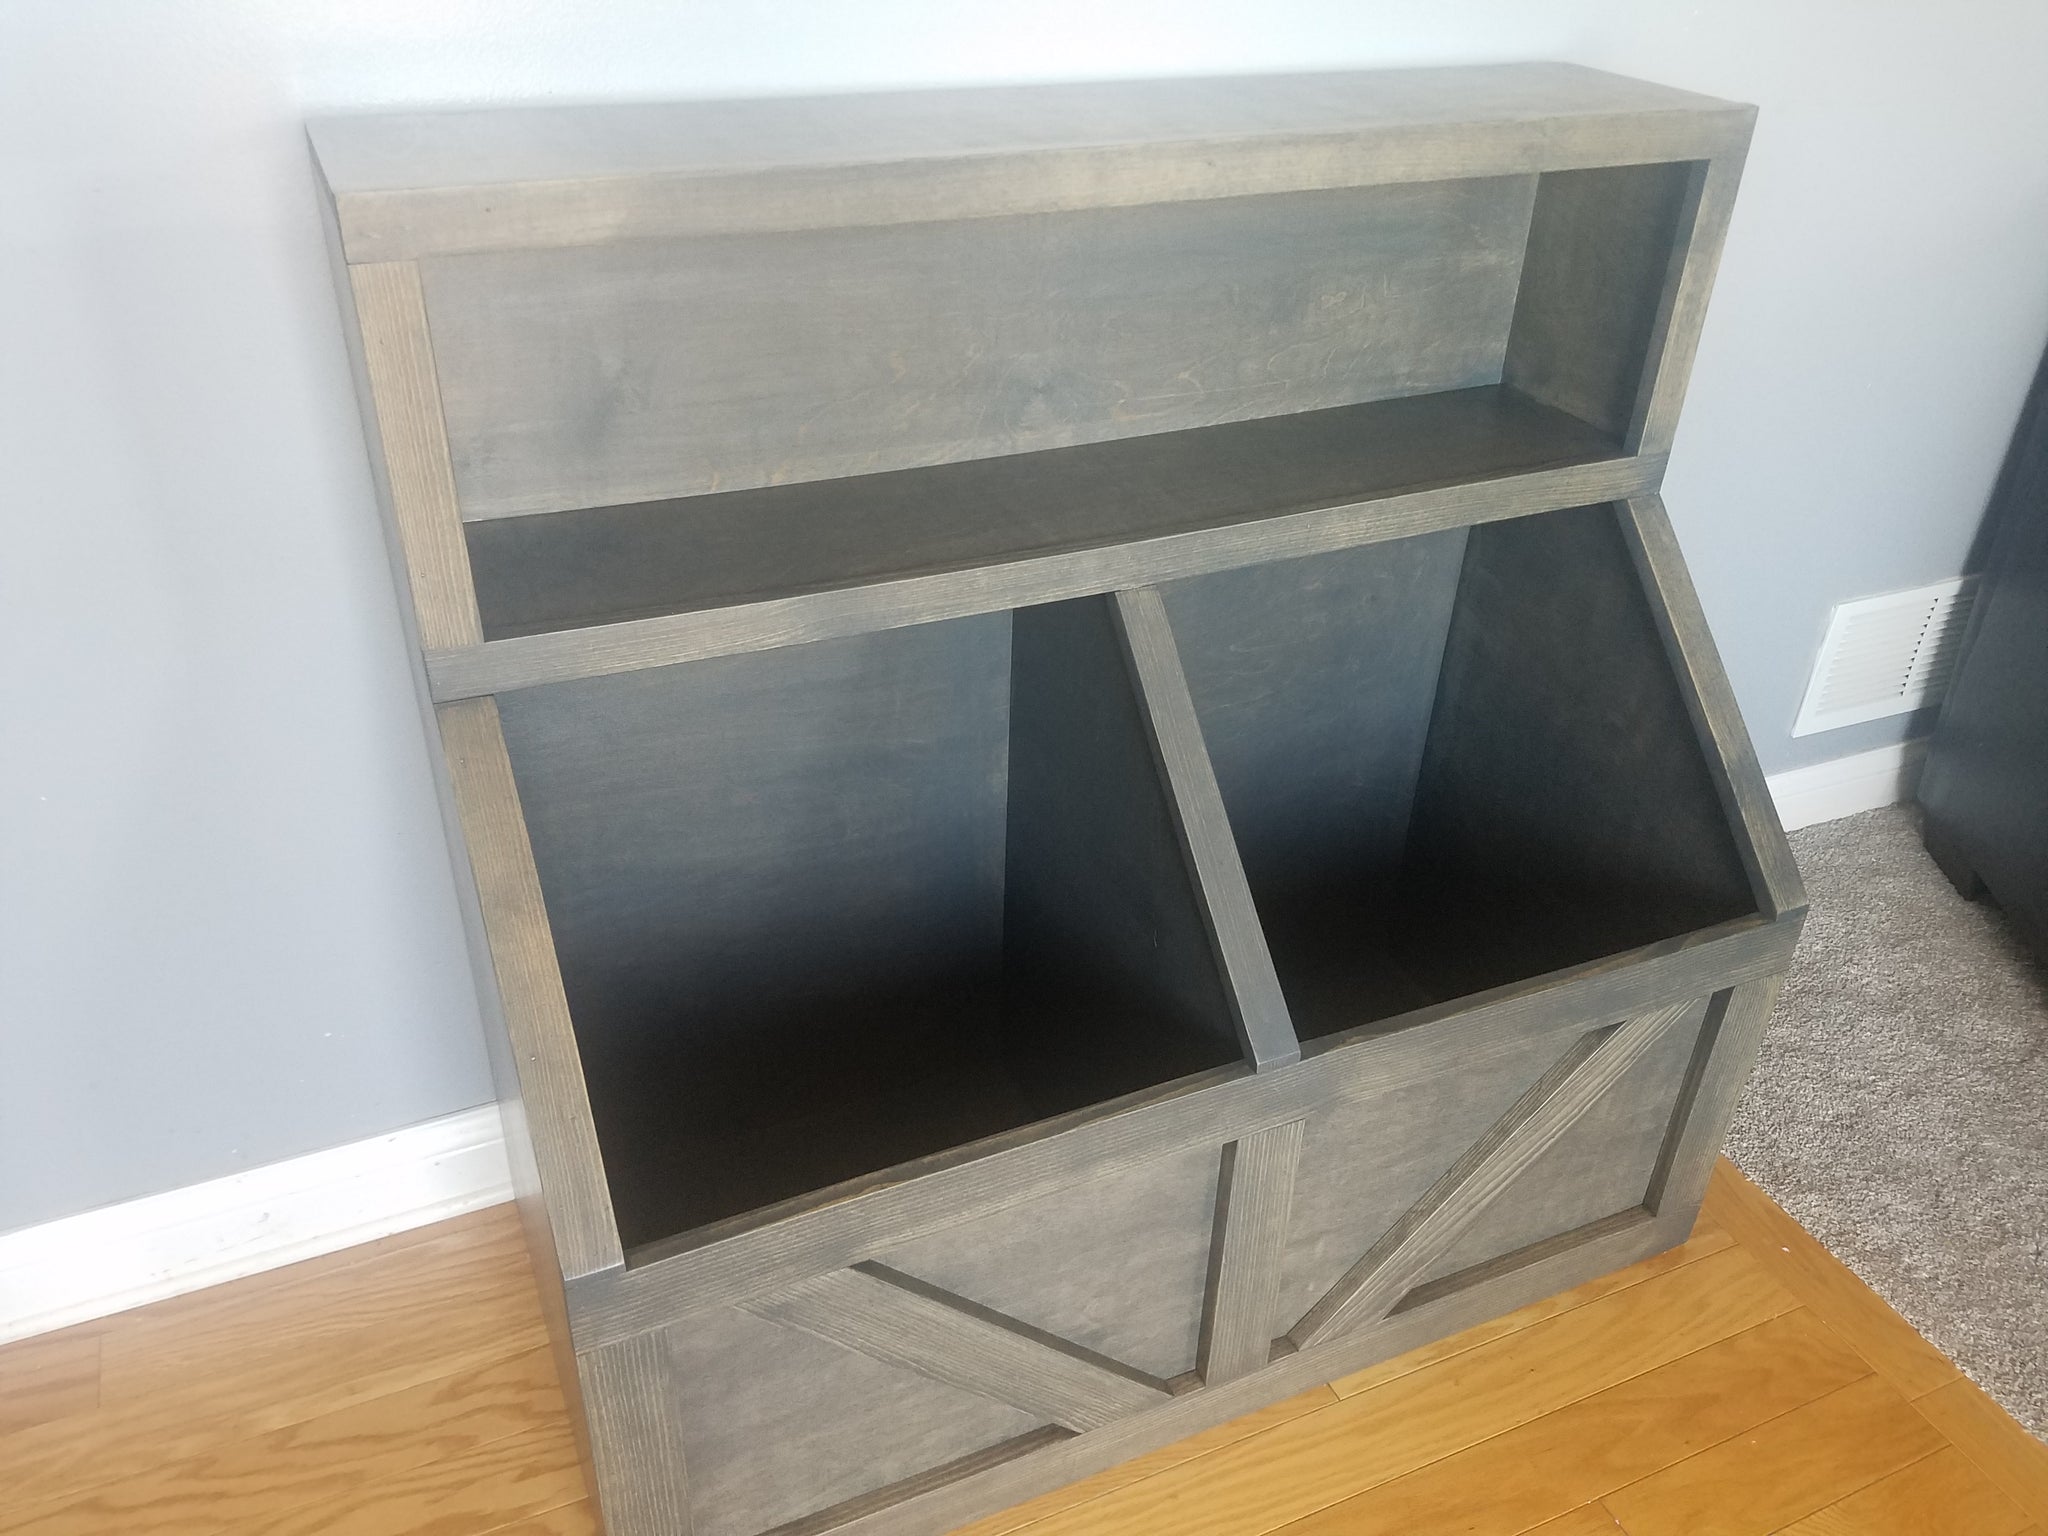 gray toy chest